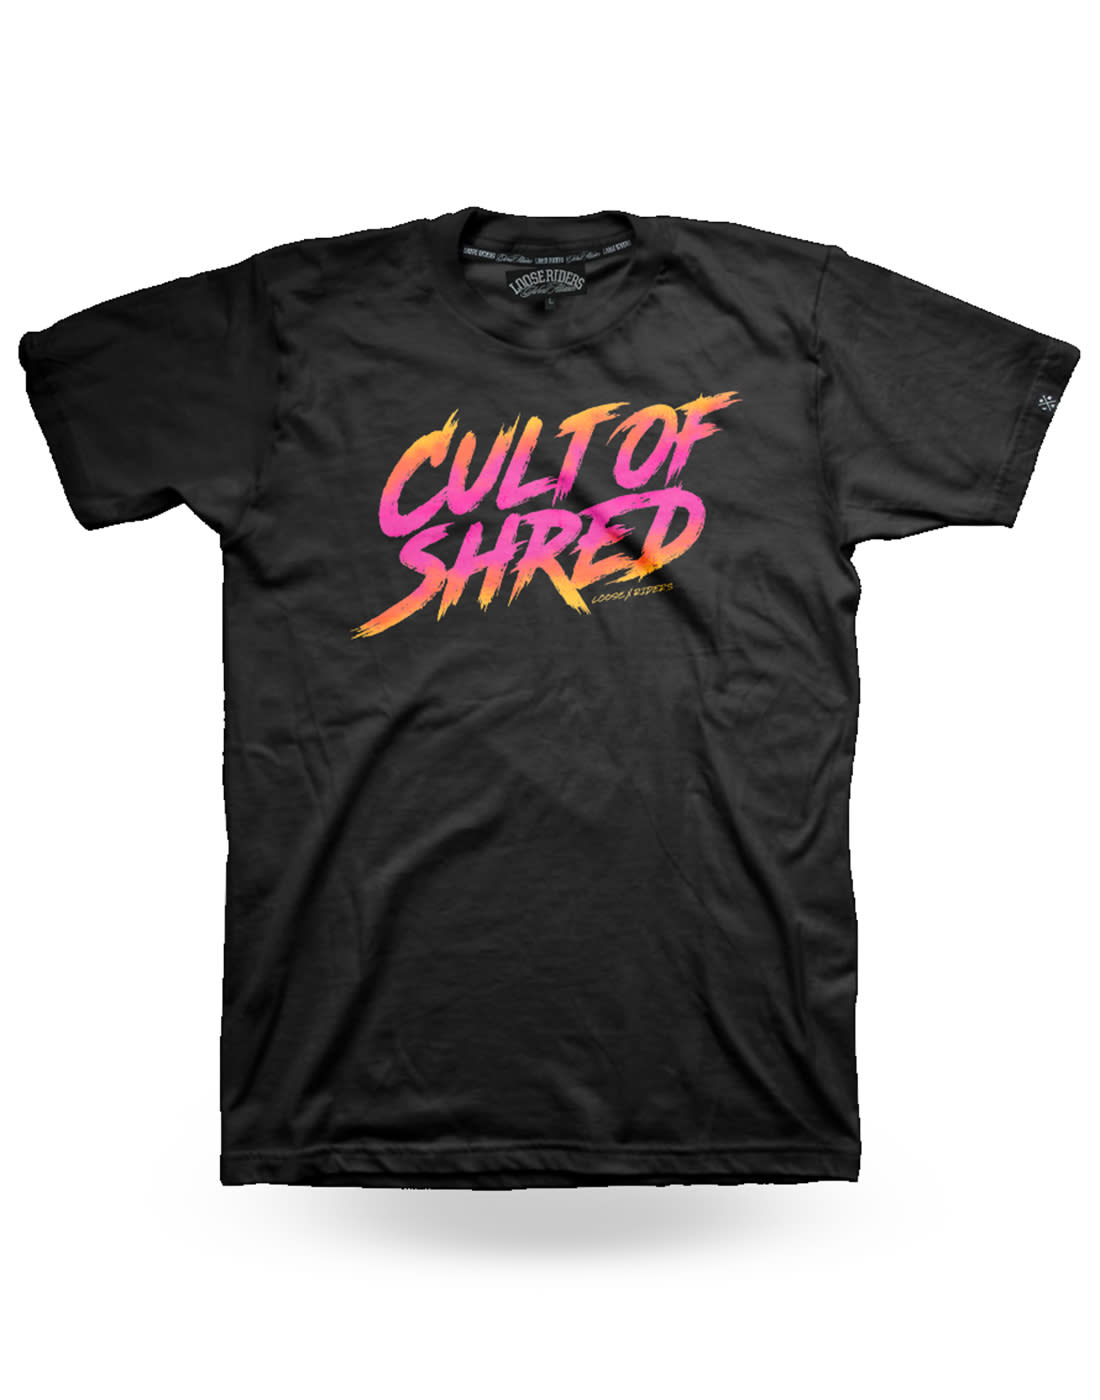 Cult of Shred